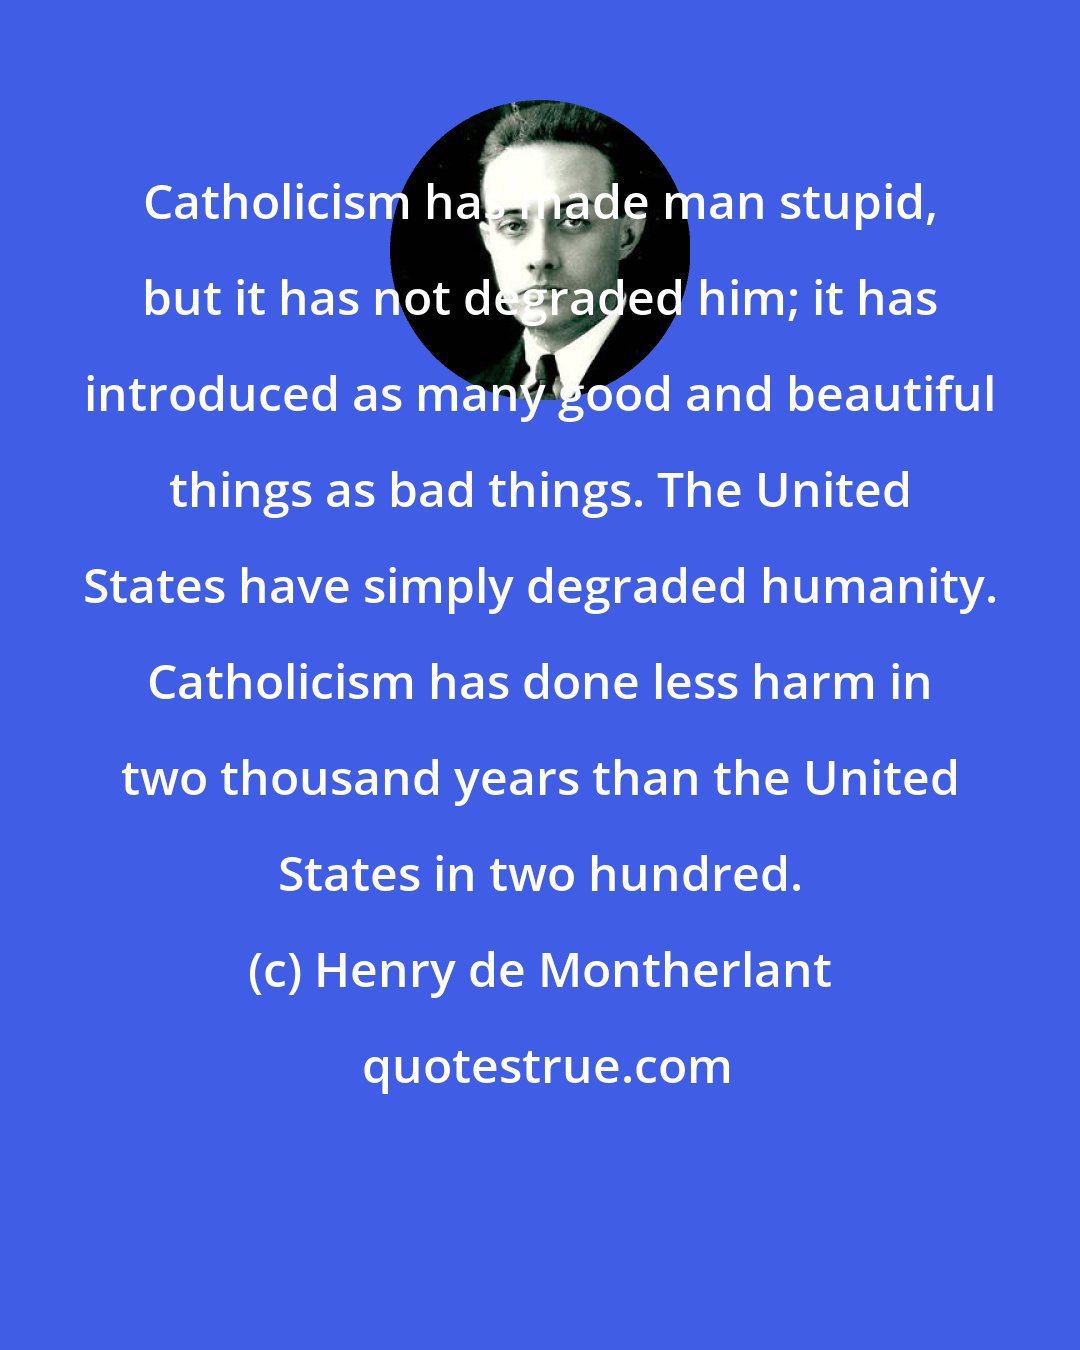 Henry de Montherlant: Catholicism has made man stupid, but it has not degraded him; it has introduced as many good and beautiful things as bad things. The United States have simply degraded humanity. Catholicism has done less harm in two thousand years than the United States in two hundred.